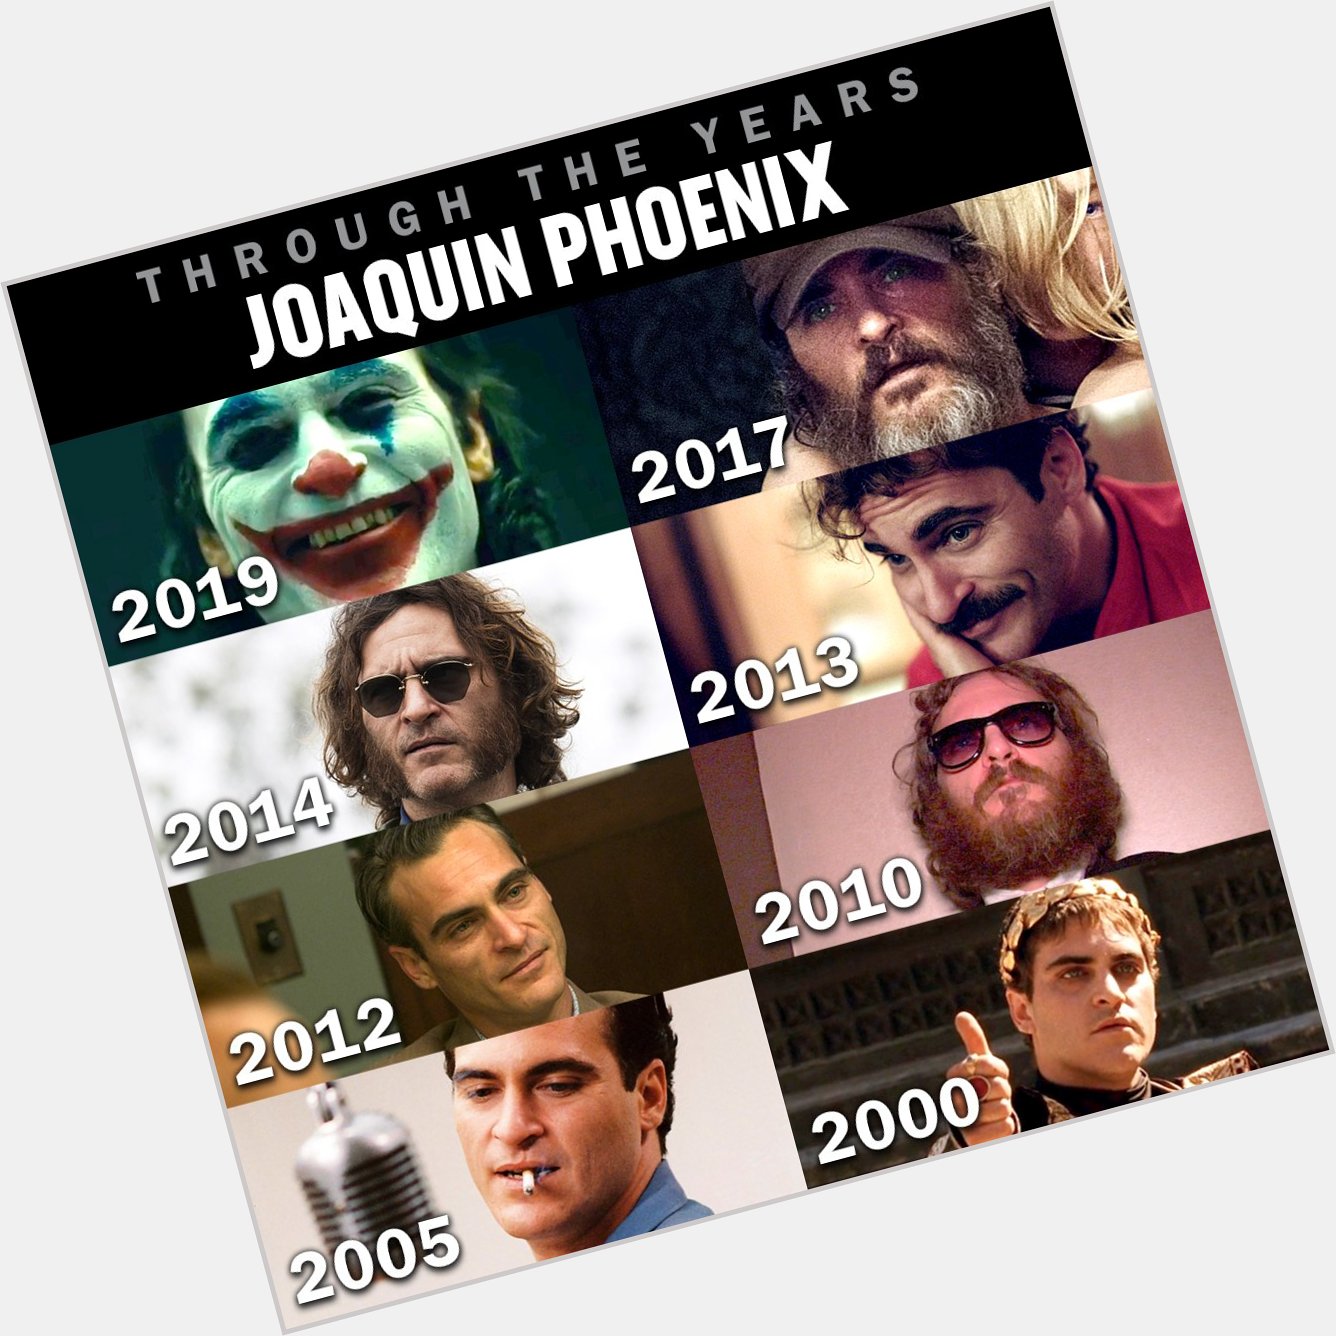 Happy birthday to the one and only Joaquin Phoenix! Which of his roles is your favorite? 